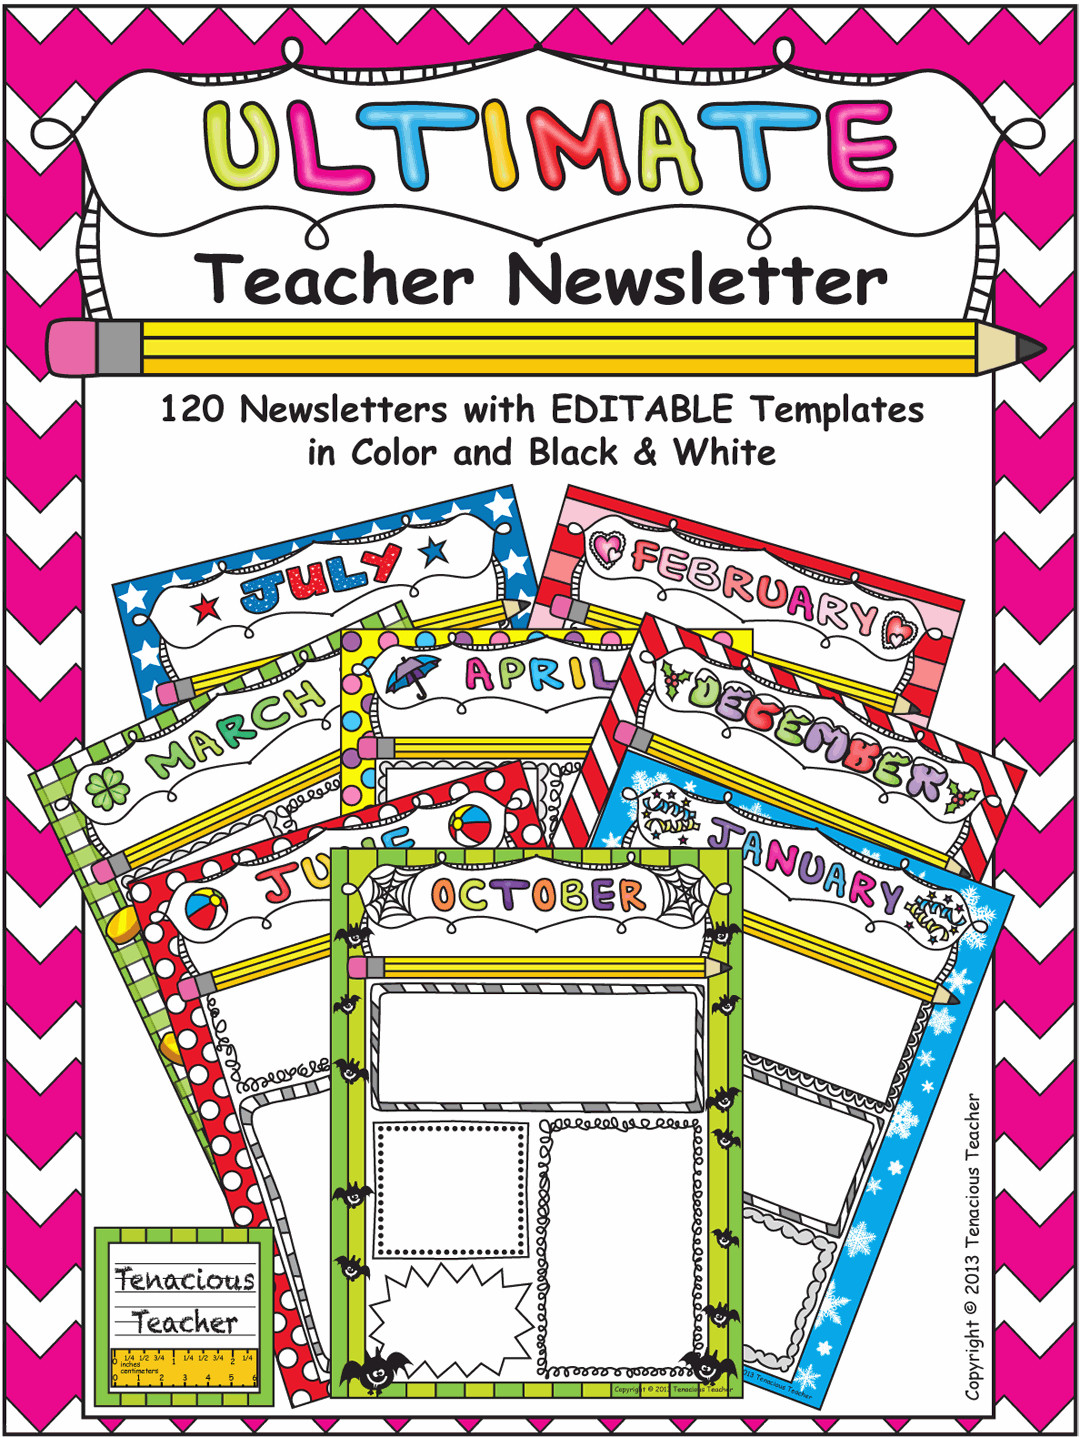 ULTIMATE Teacher Newsletter—120 color and black and white